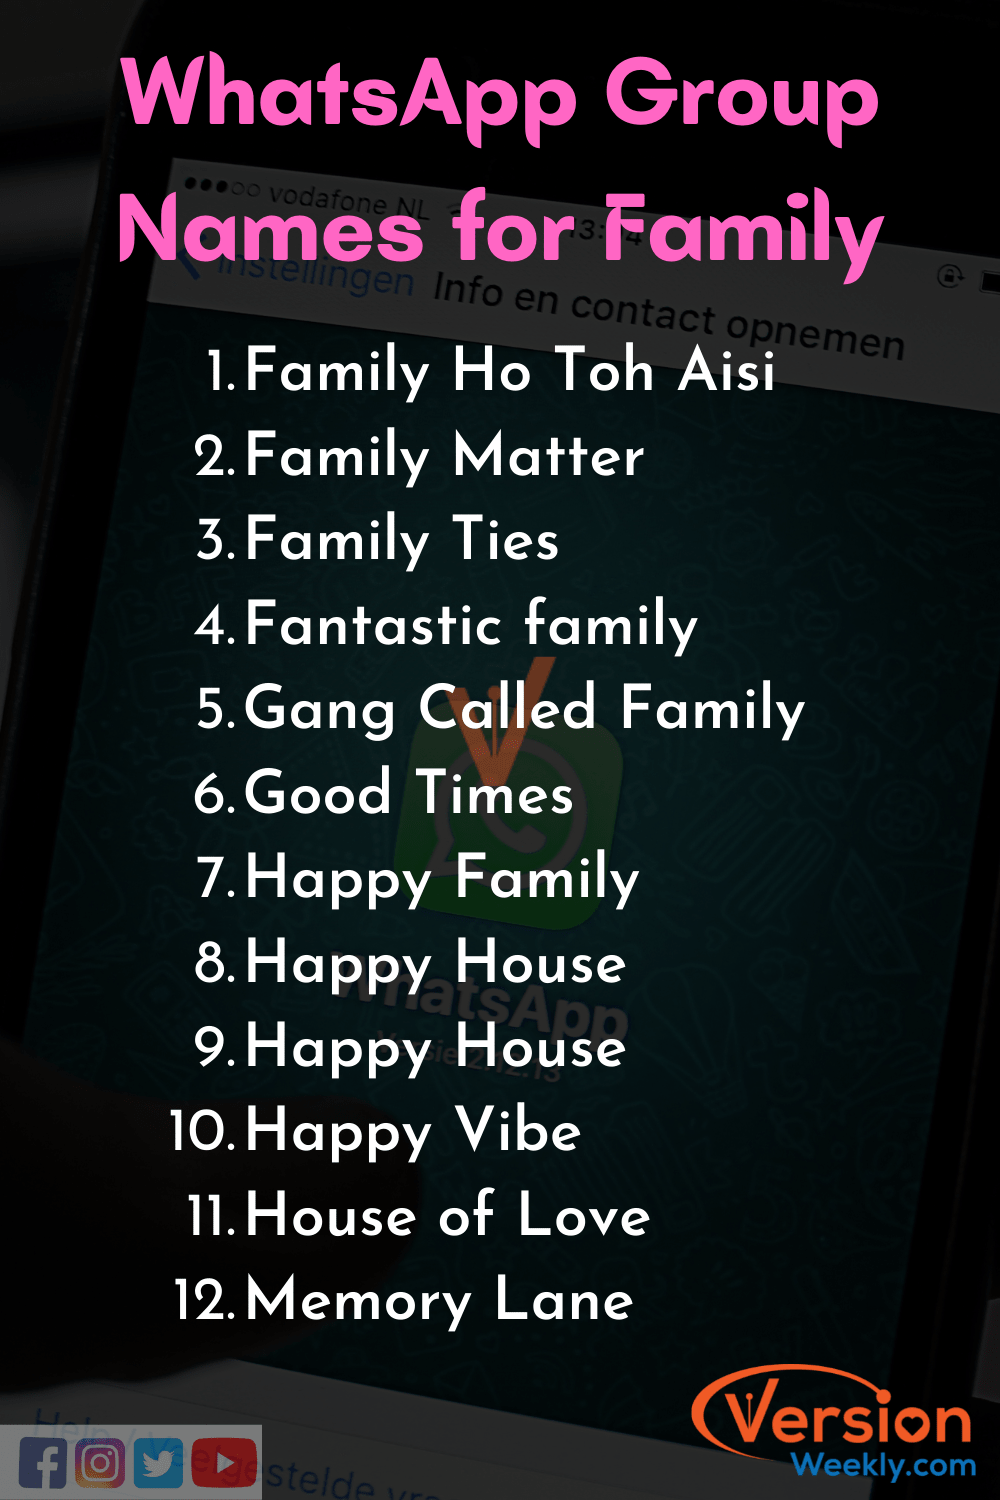 whatsapp group names for family